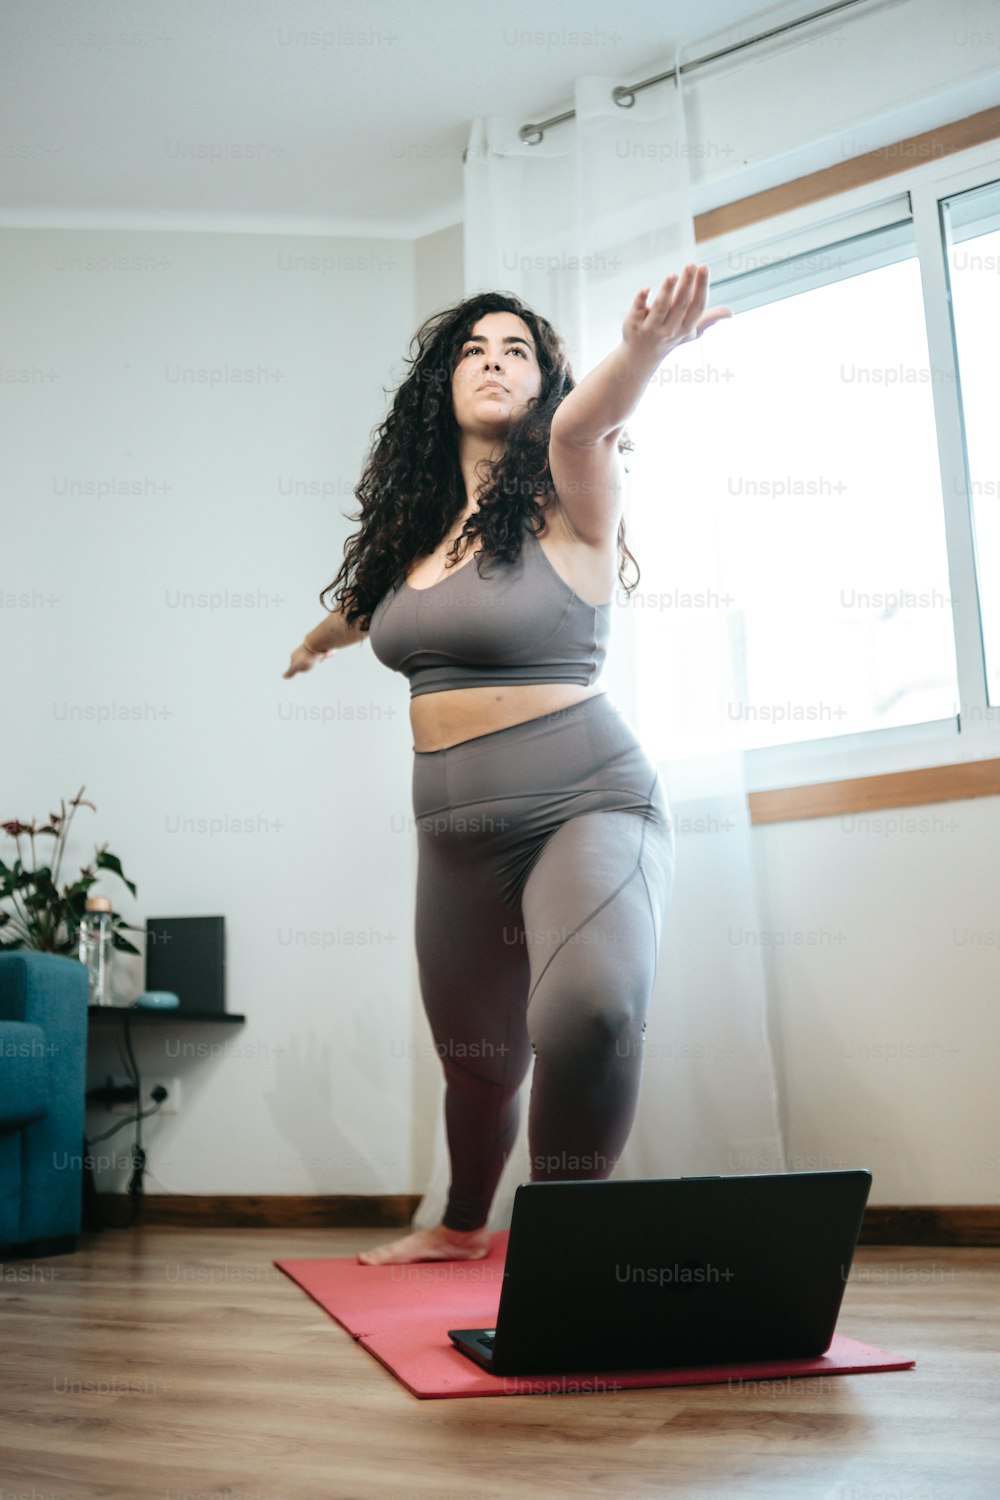 a woman standing on a yoga mat in front of a laptop